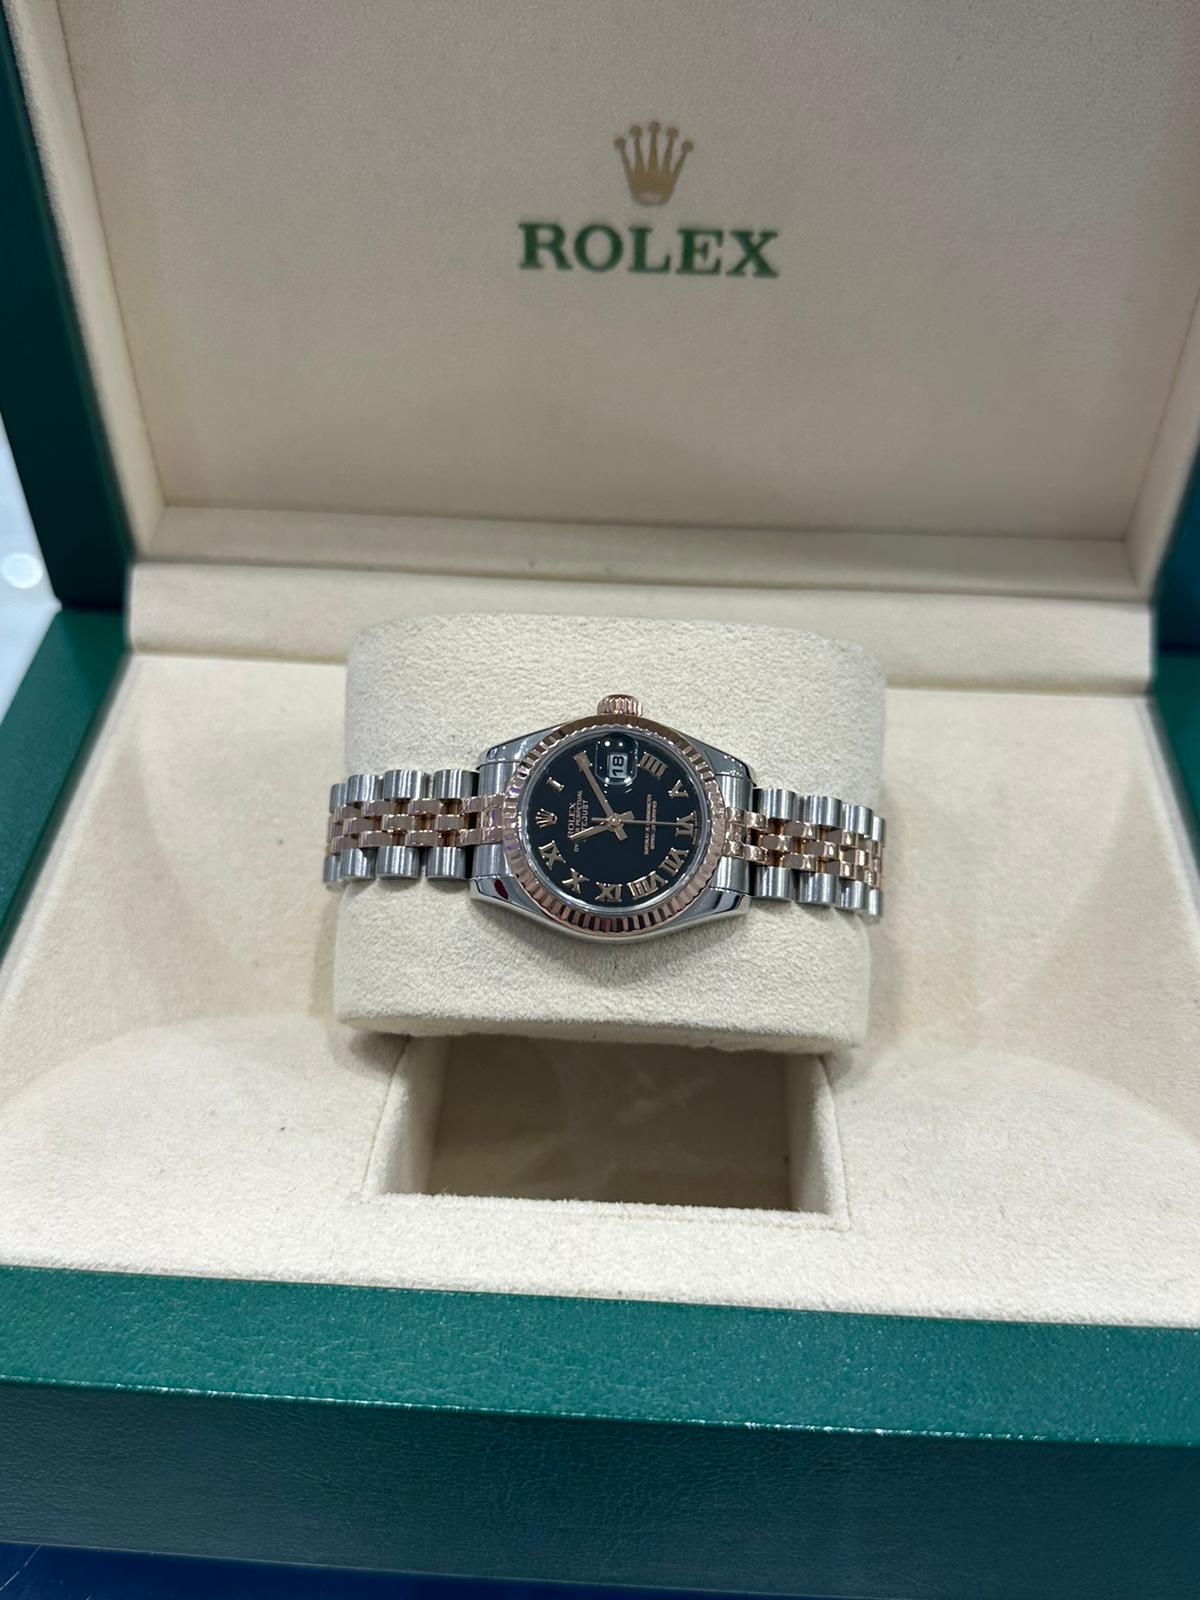 Rolex Datejust 26mm steel and rose gold - 179171 2 - Image 2 of 10